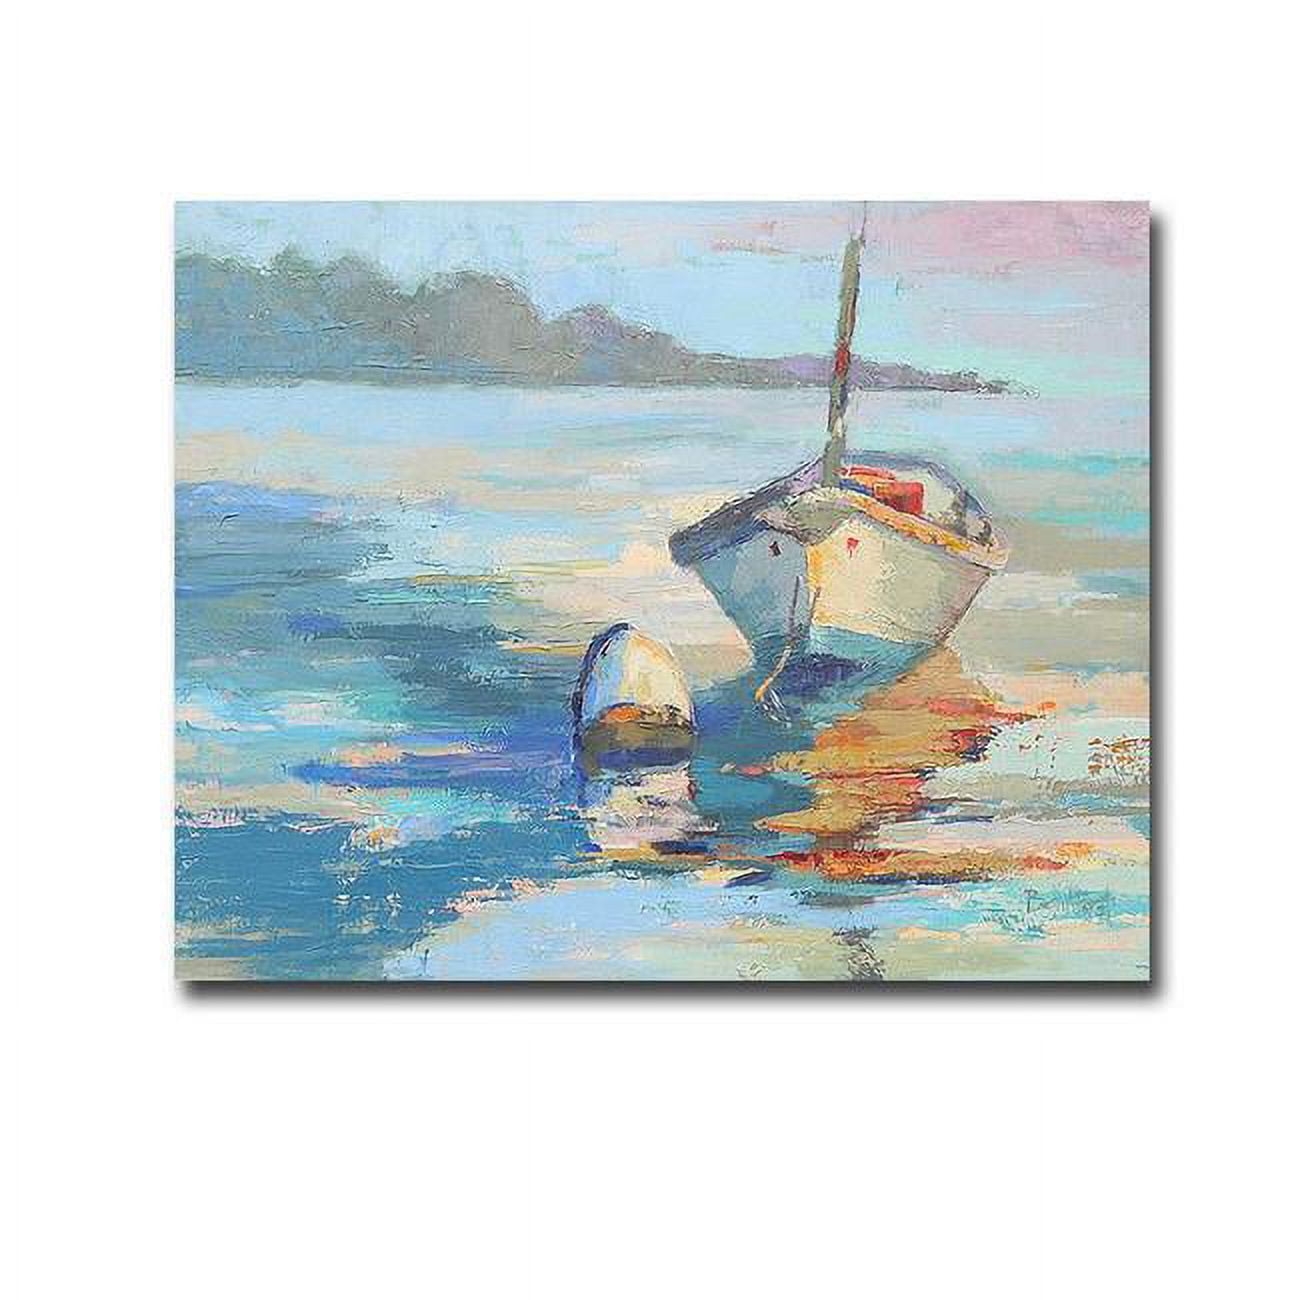 16200n944ig Monhegan Island Taxi By Beth A Forst Premium Gallery-wrapped Canvas Giclee Art - Ready-to-hang, 16 X 20 X 1.5 In.